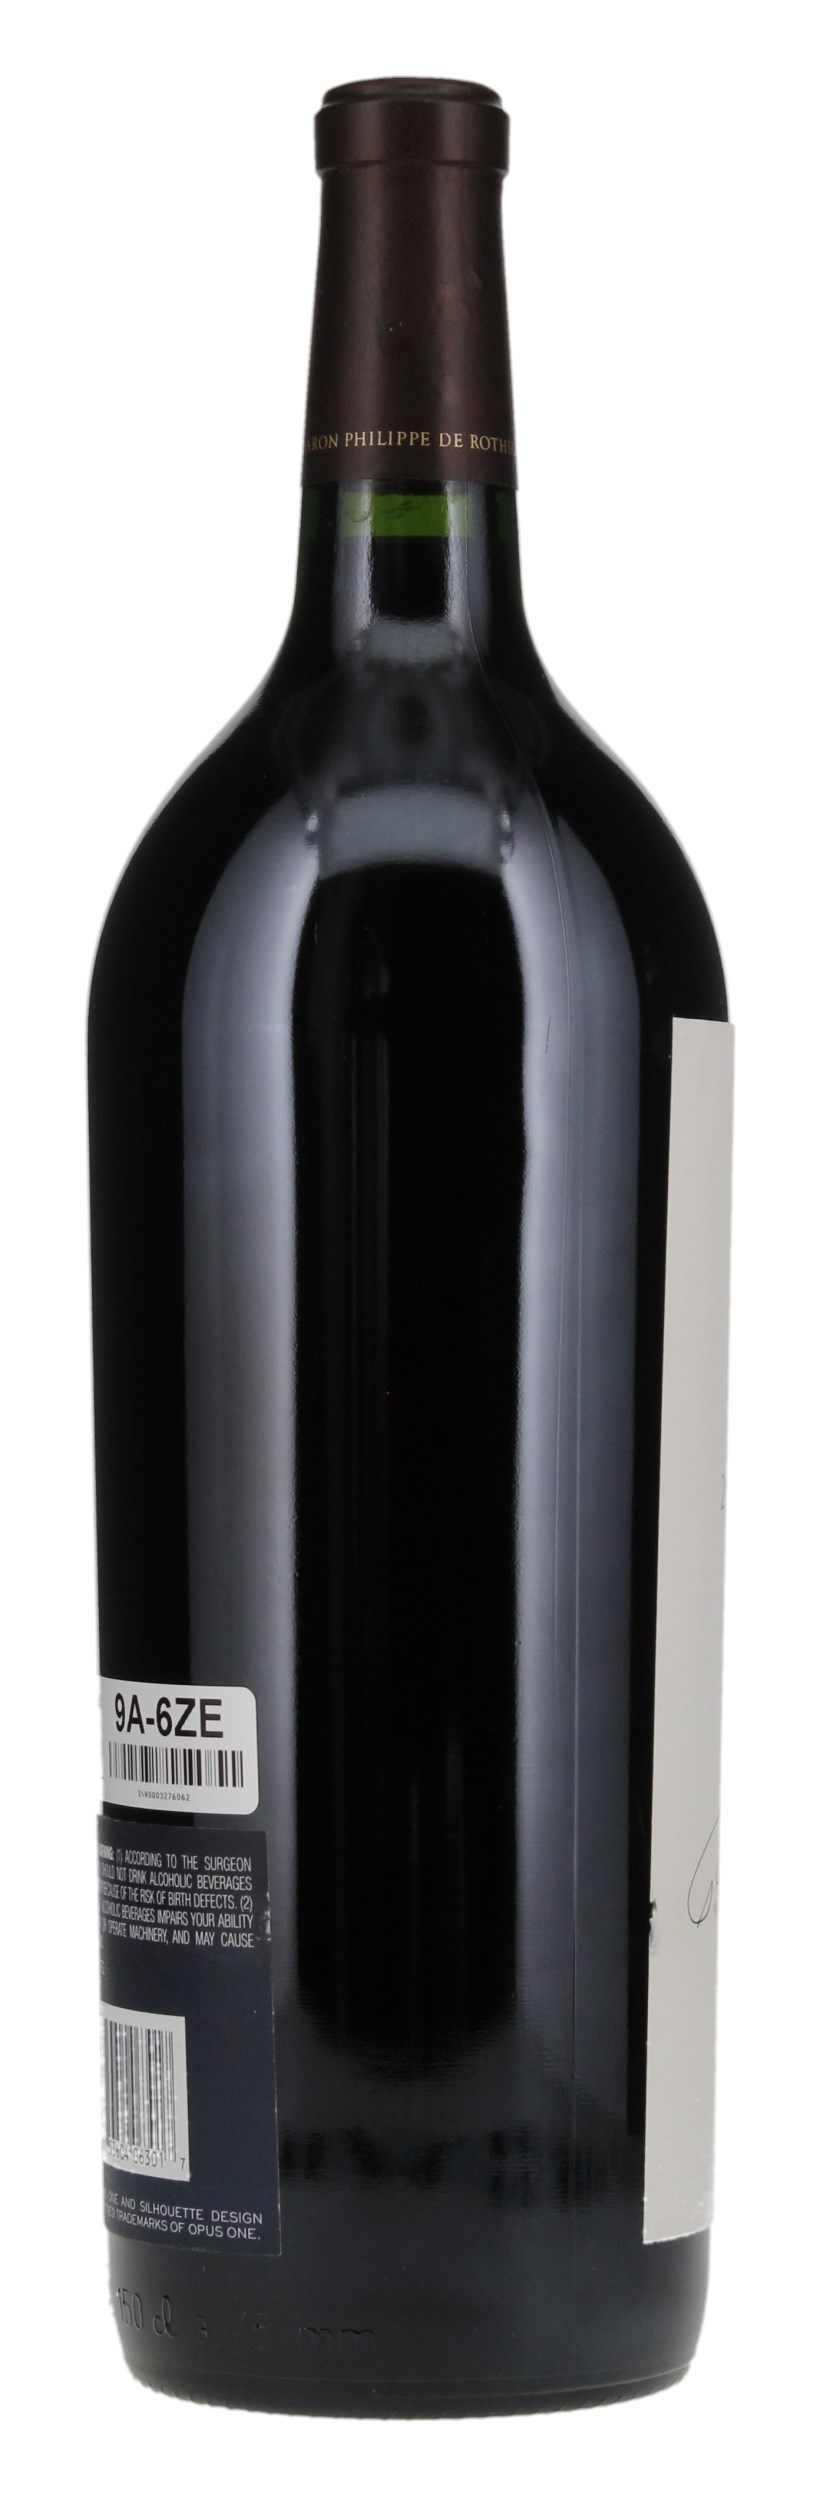 2001 Opus One, 1.5ltr